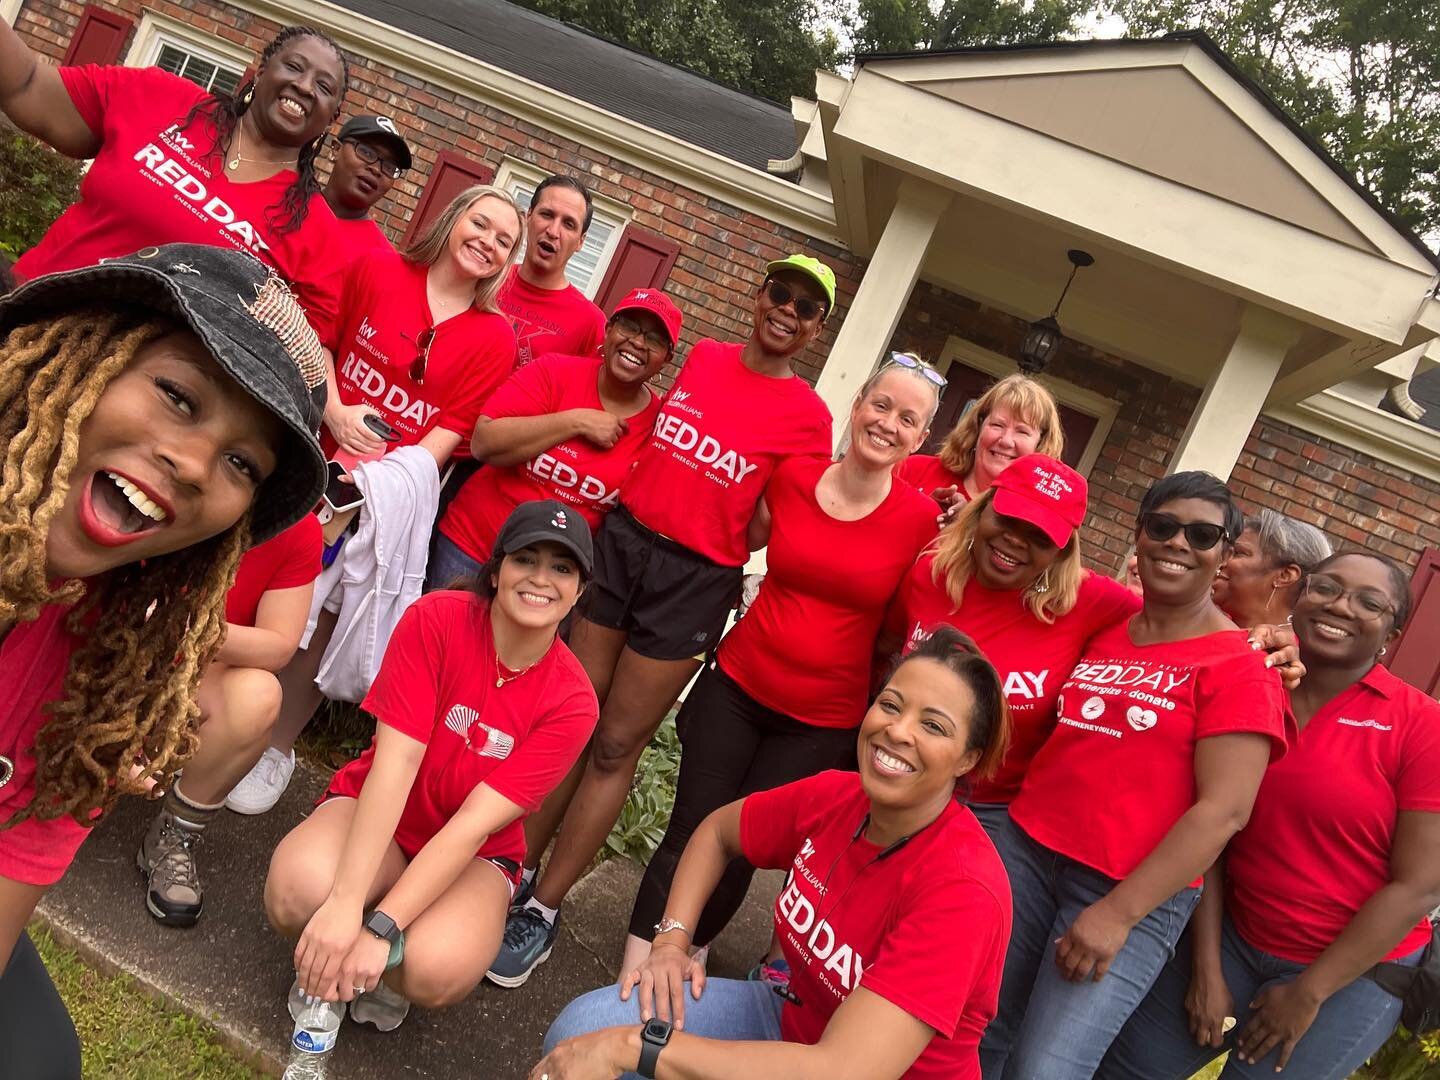 Keller Williams RED Day, which stands for Renew, Energize and Donate, is their annual day of service, and we are honored to have been a part of it!